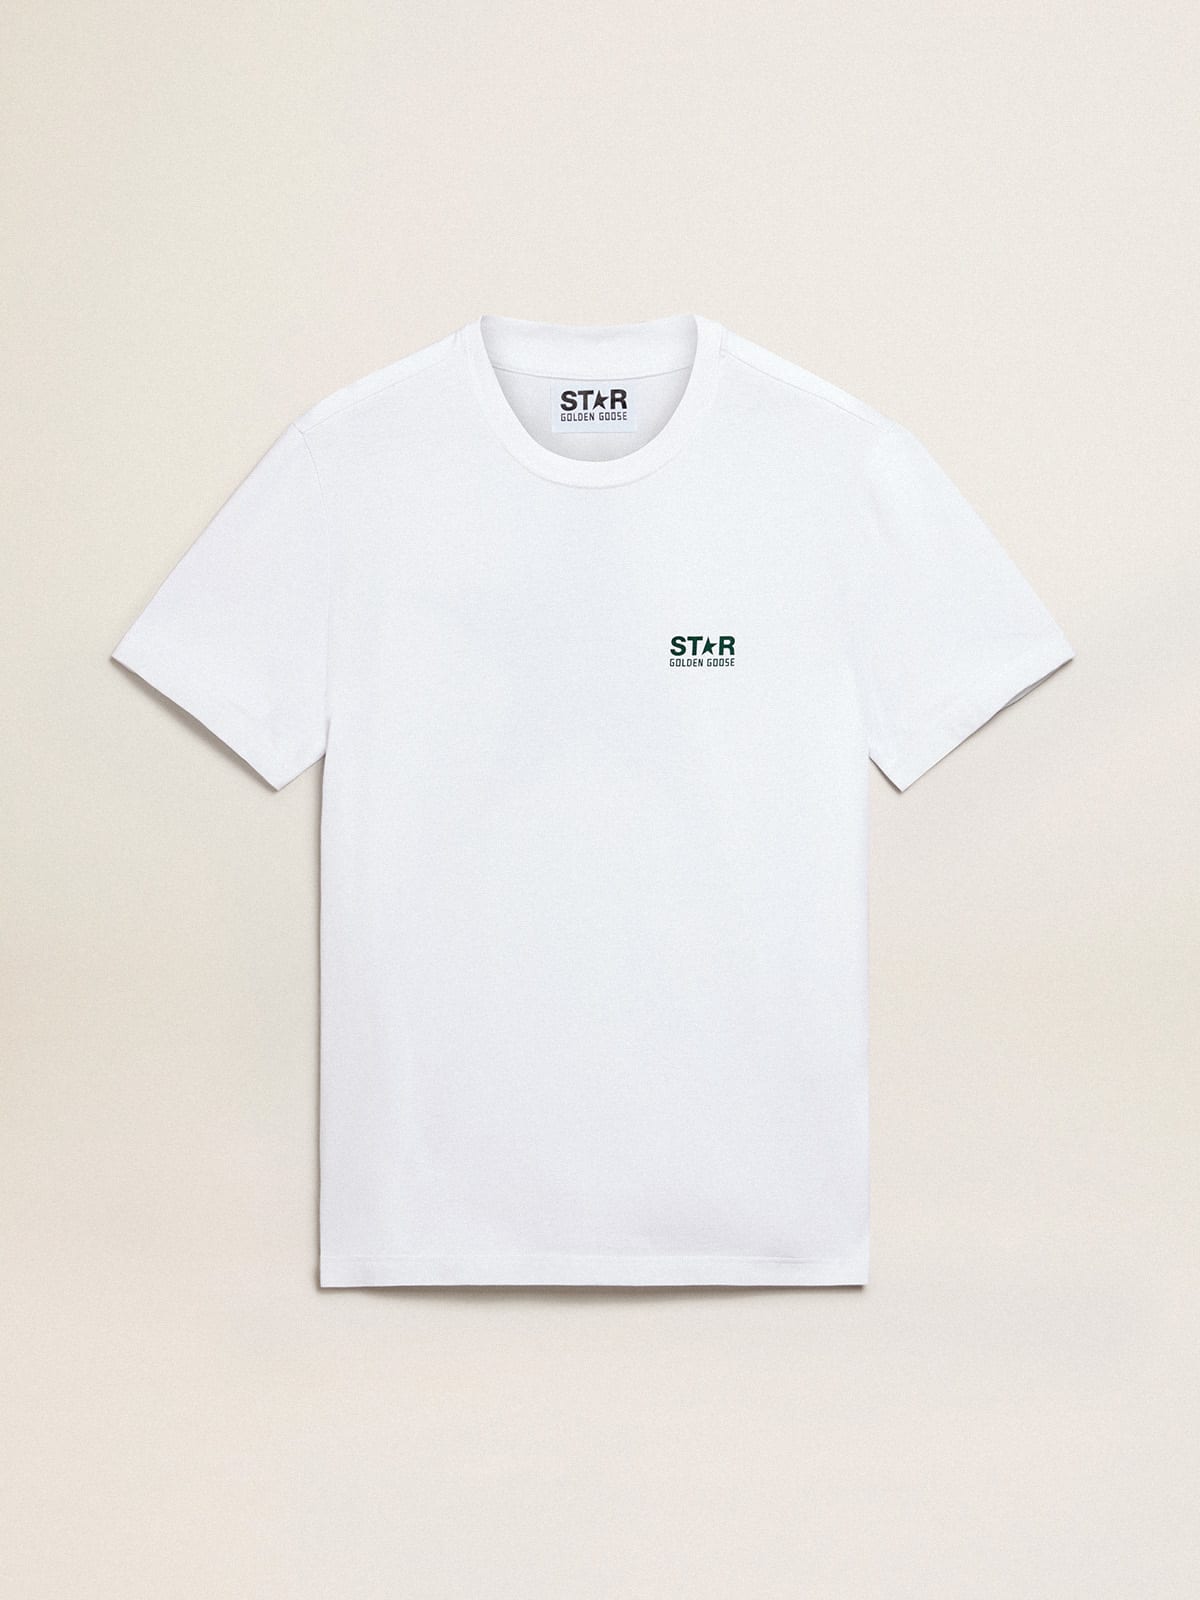 White Star Collection T-shirt with contrasting green logo and star